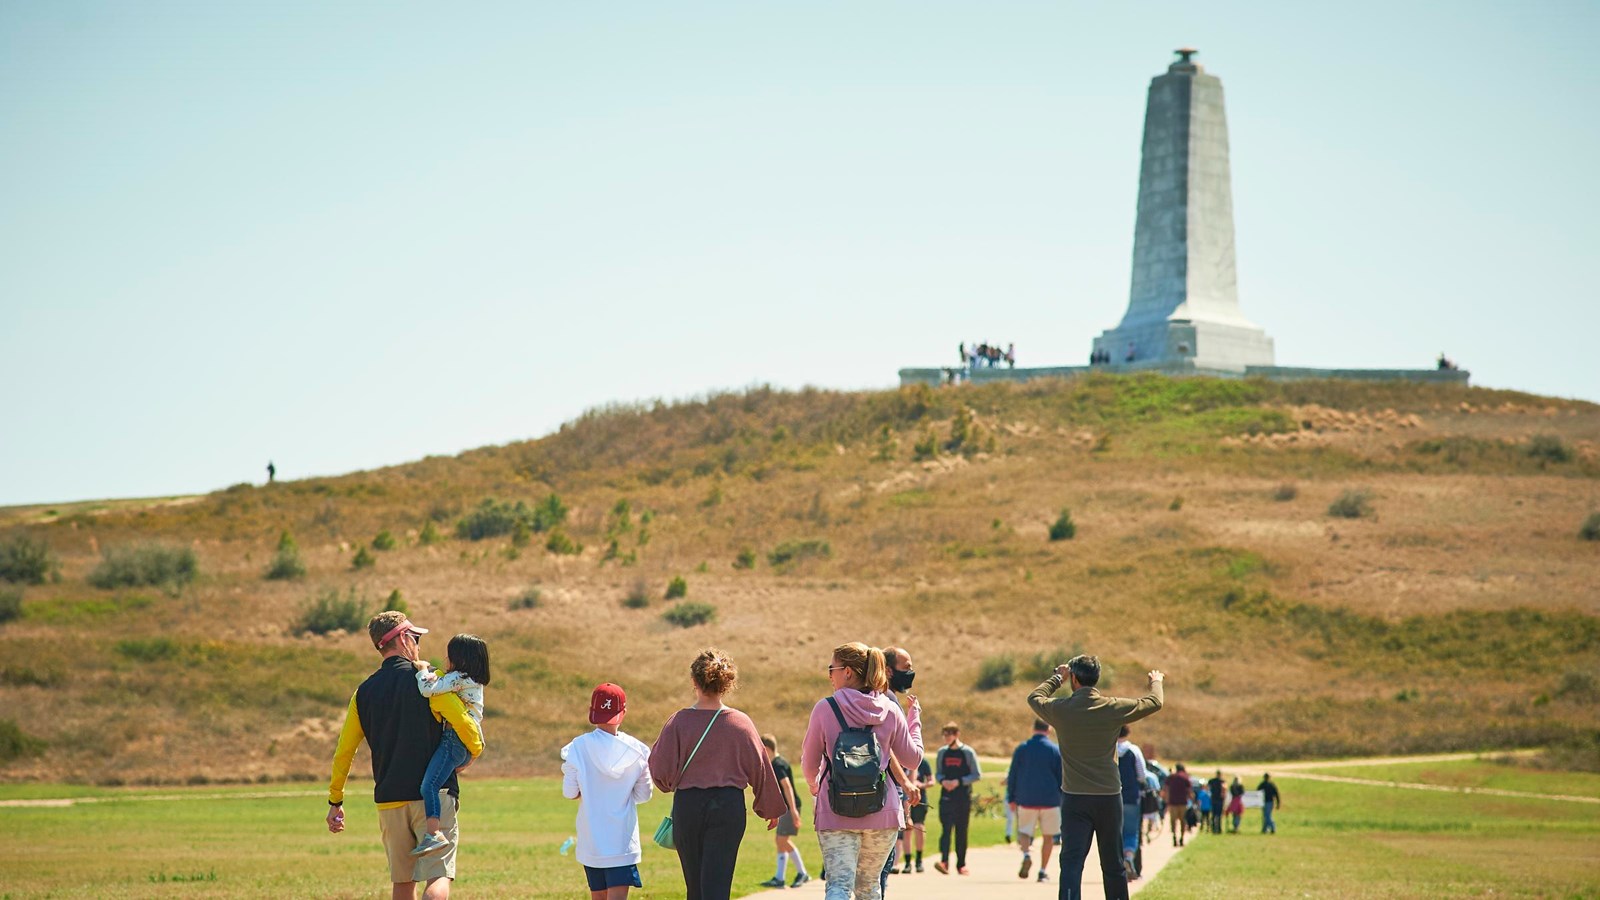 Visitors walk along the path towards the monument in the distance.